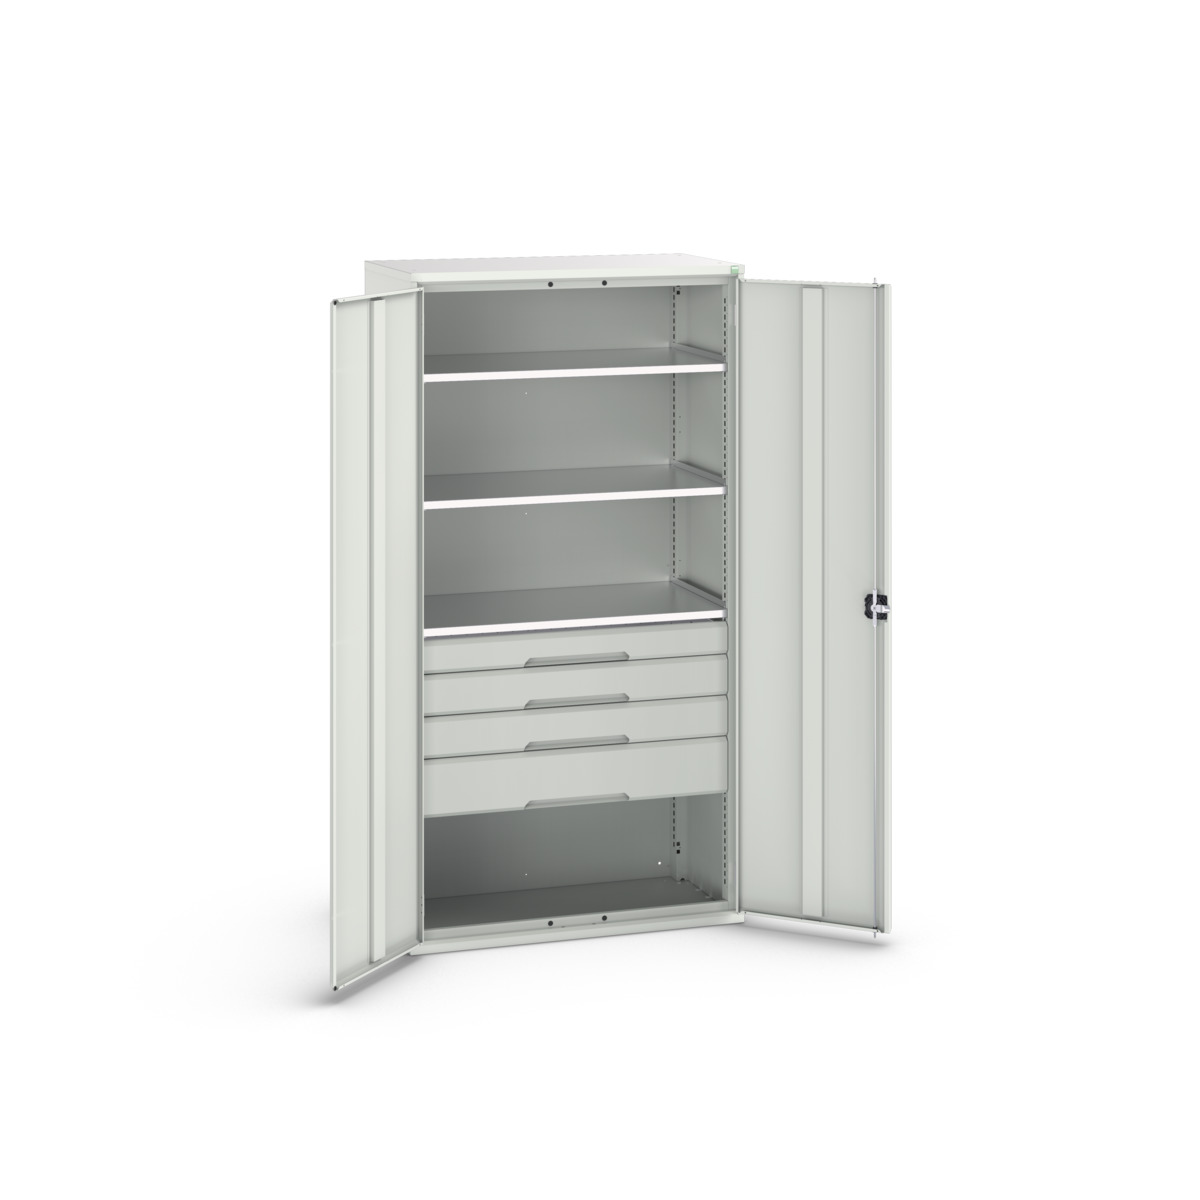 16926576.16 - verso kitted cupboard